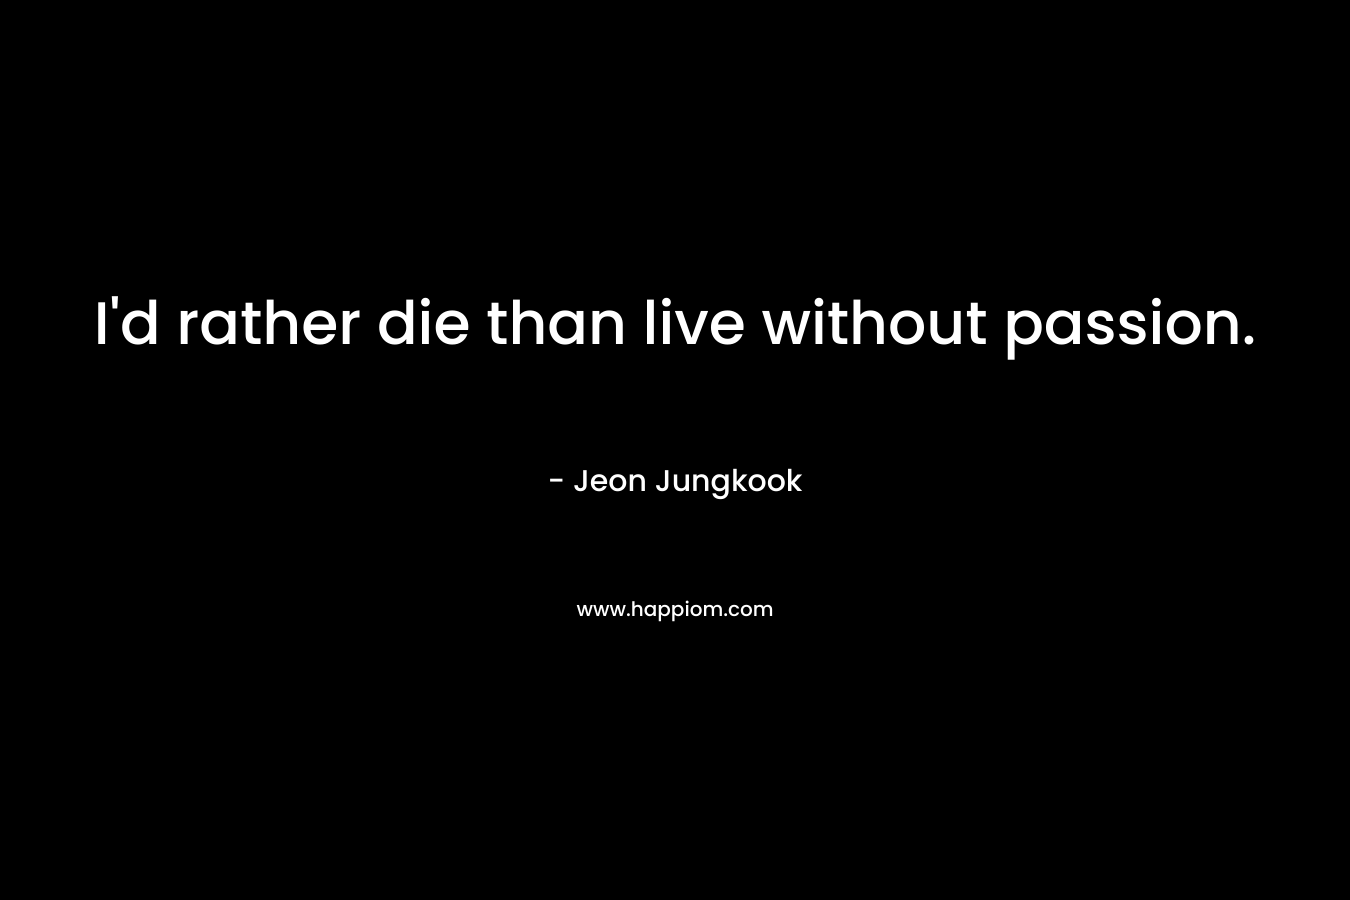 I’d rather die than live without passion. – Jeon Jungkook